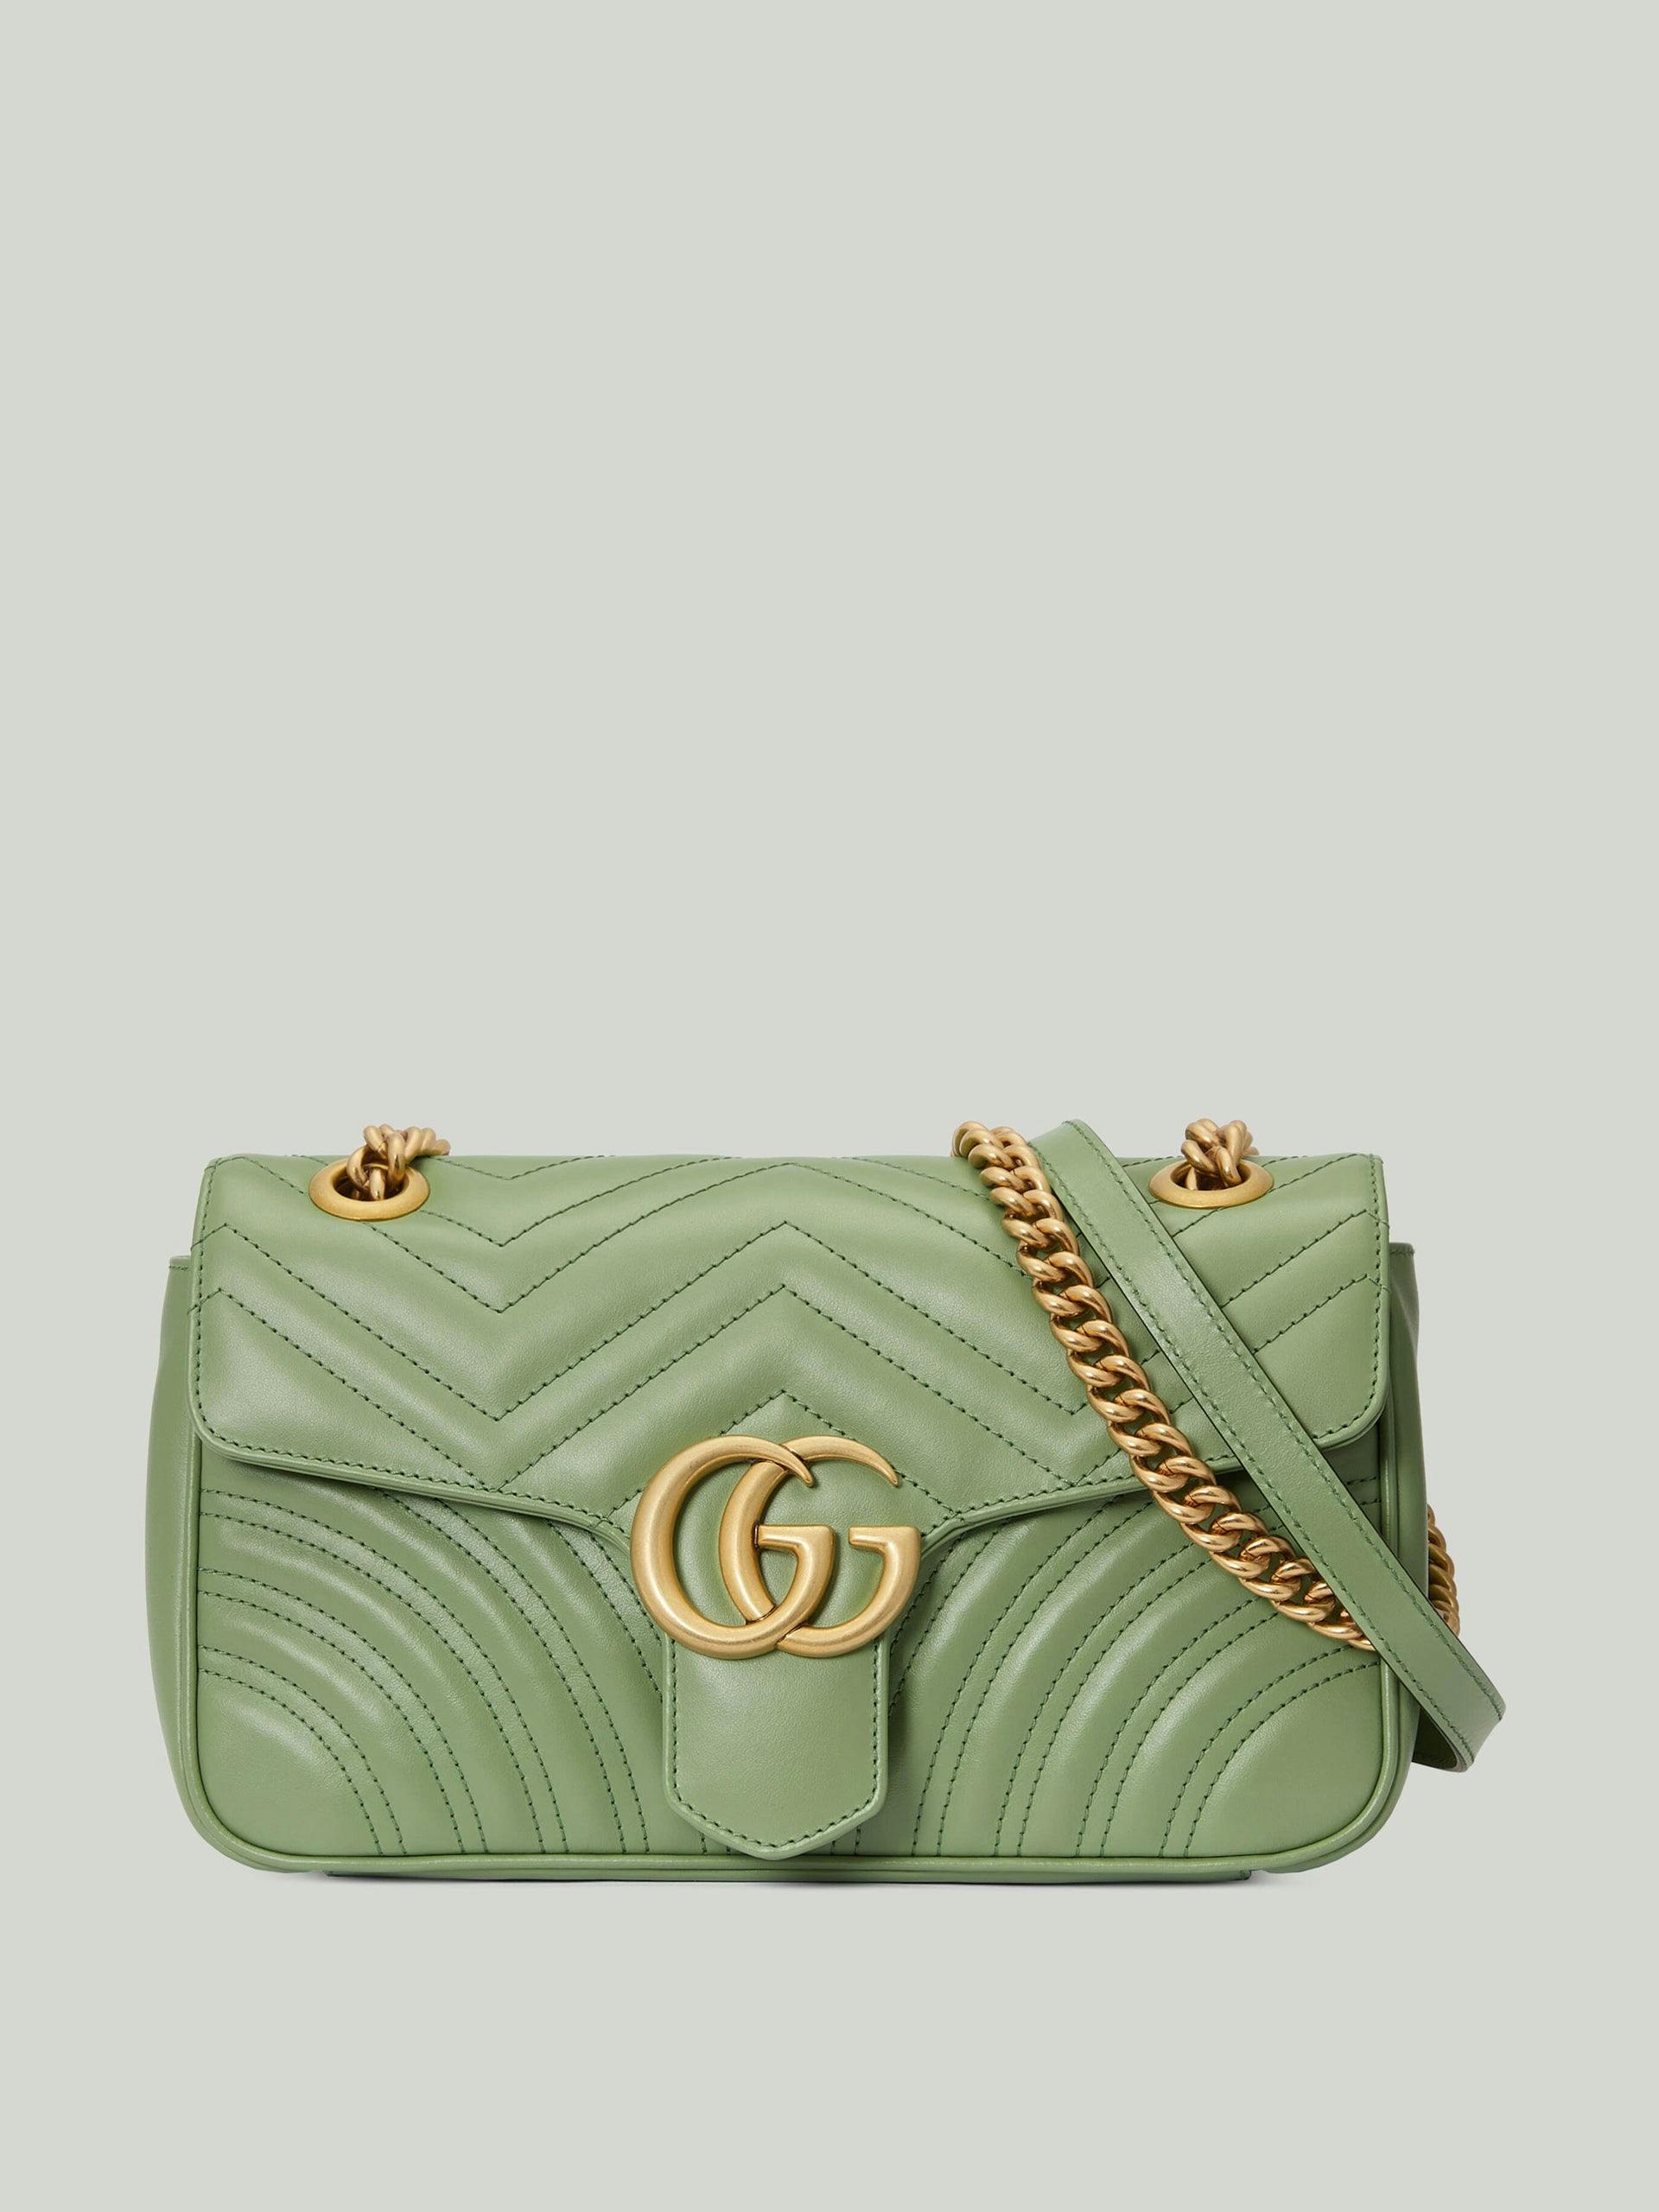 Green leather Marmont bag